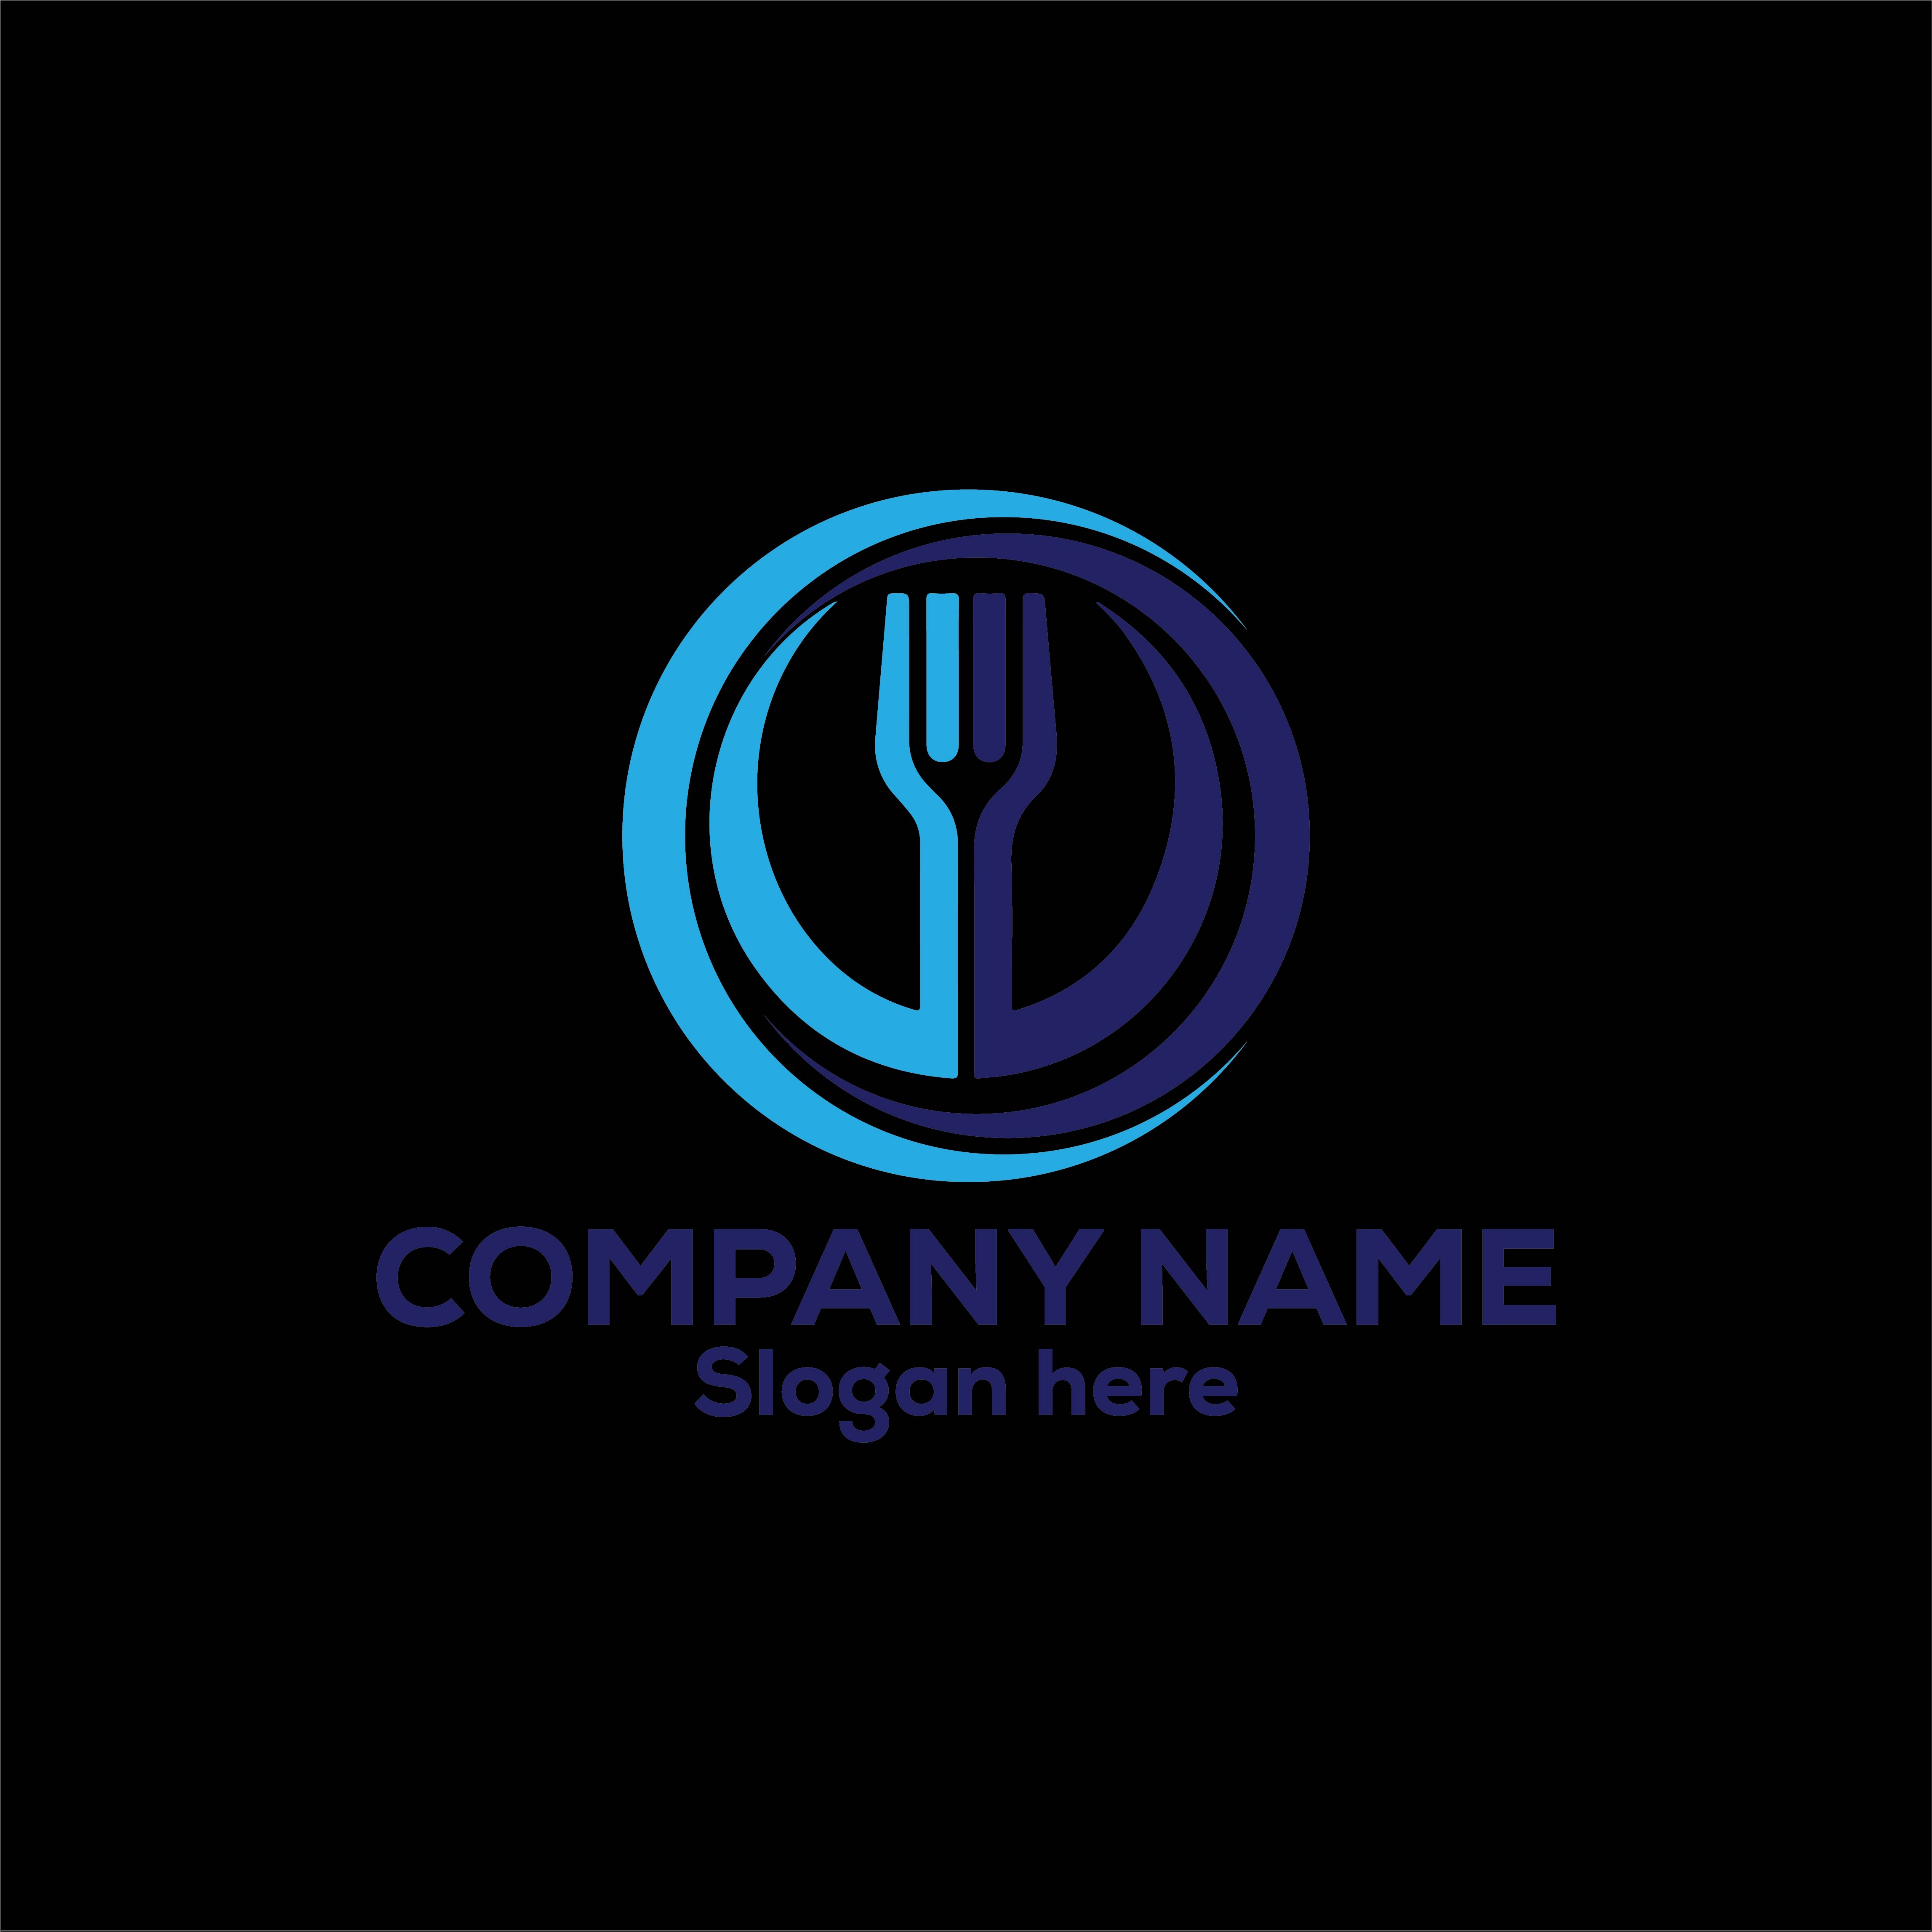 Restaurant Logo or Icon Design Vector Image Template preview image.